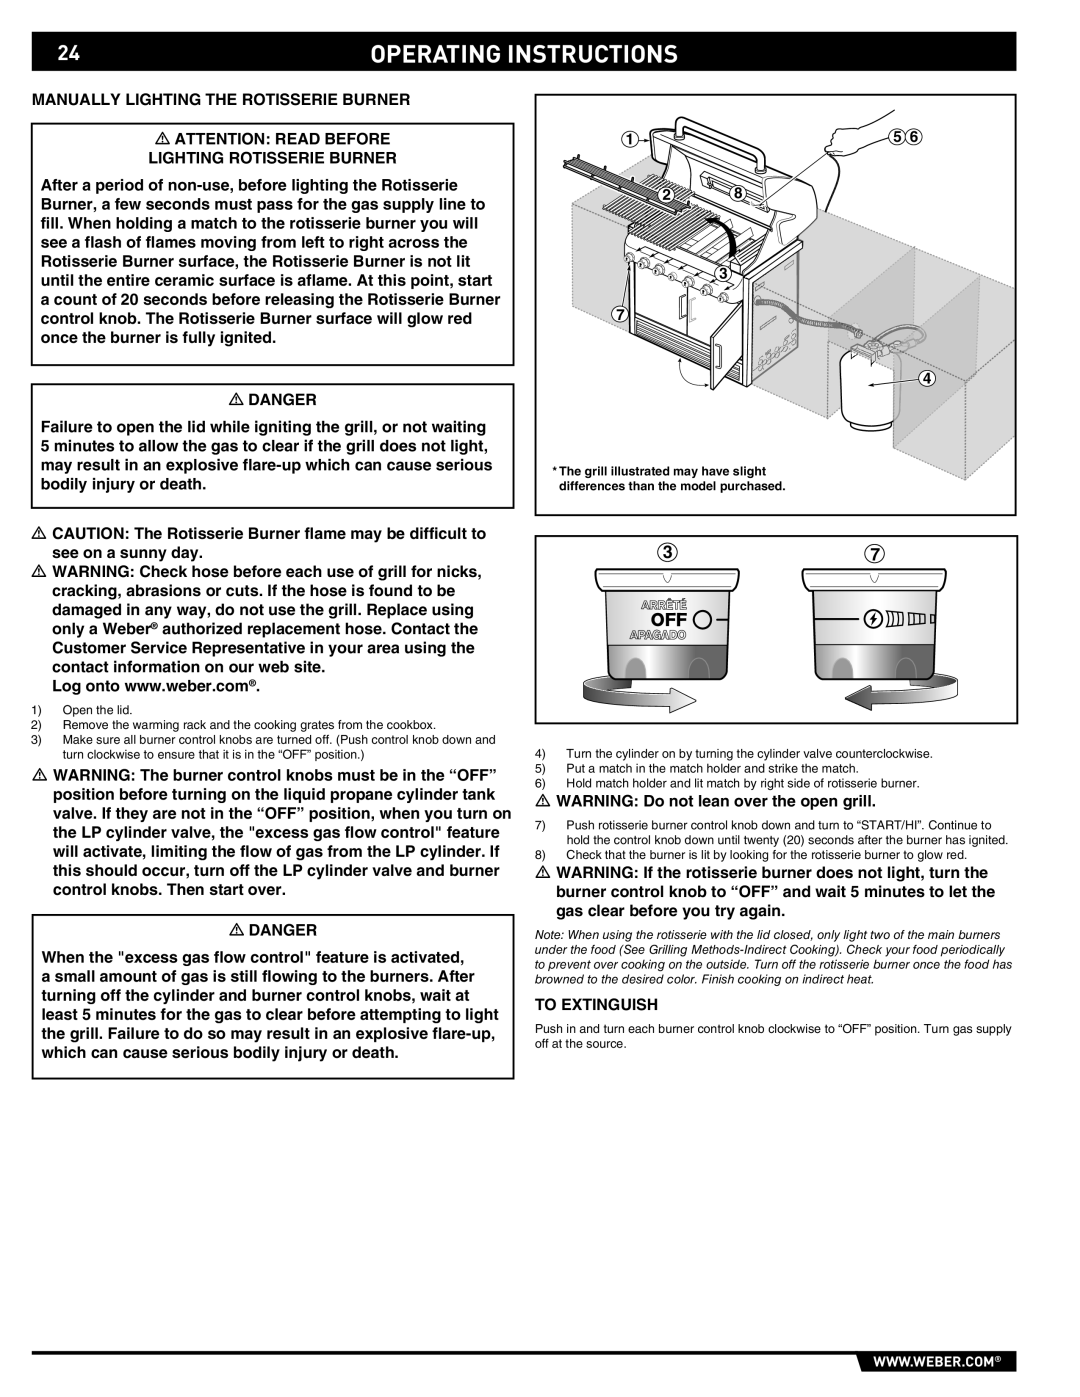 Weber S-460 manual Operating Instructions 